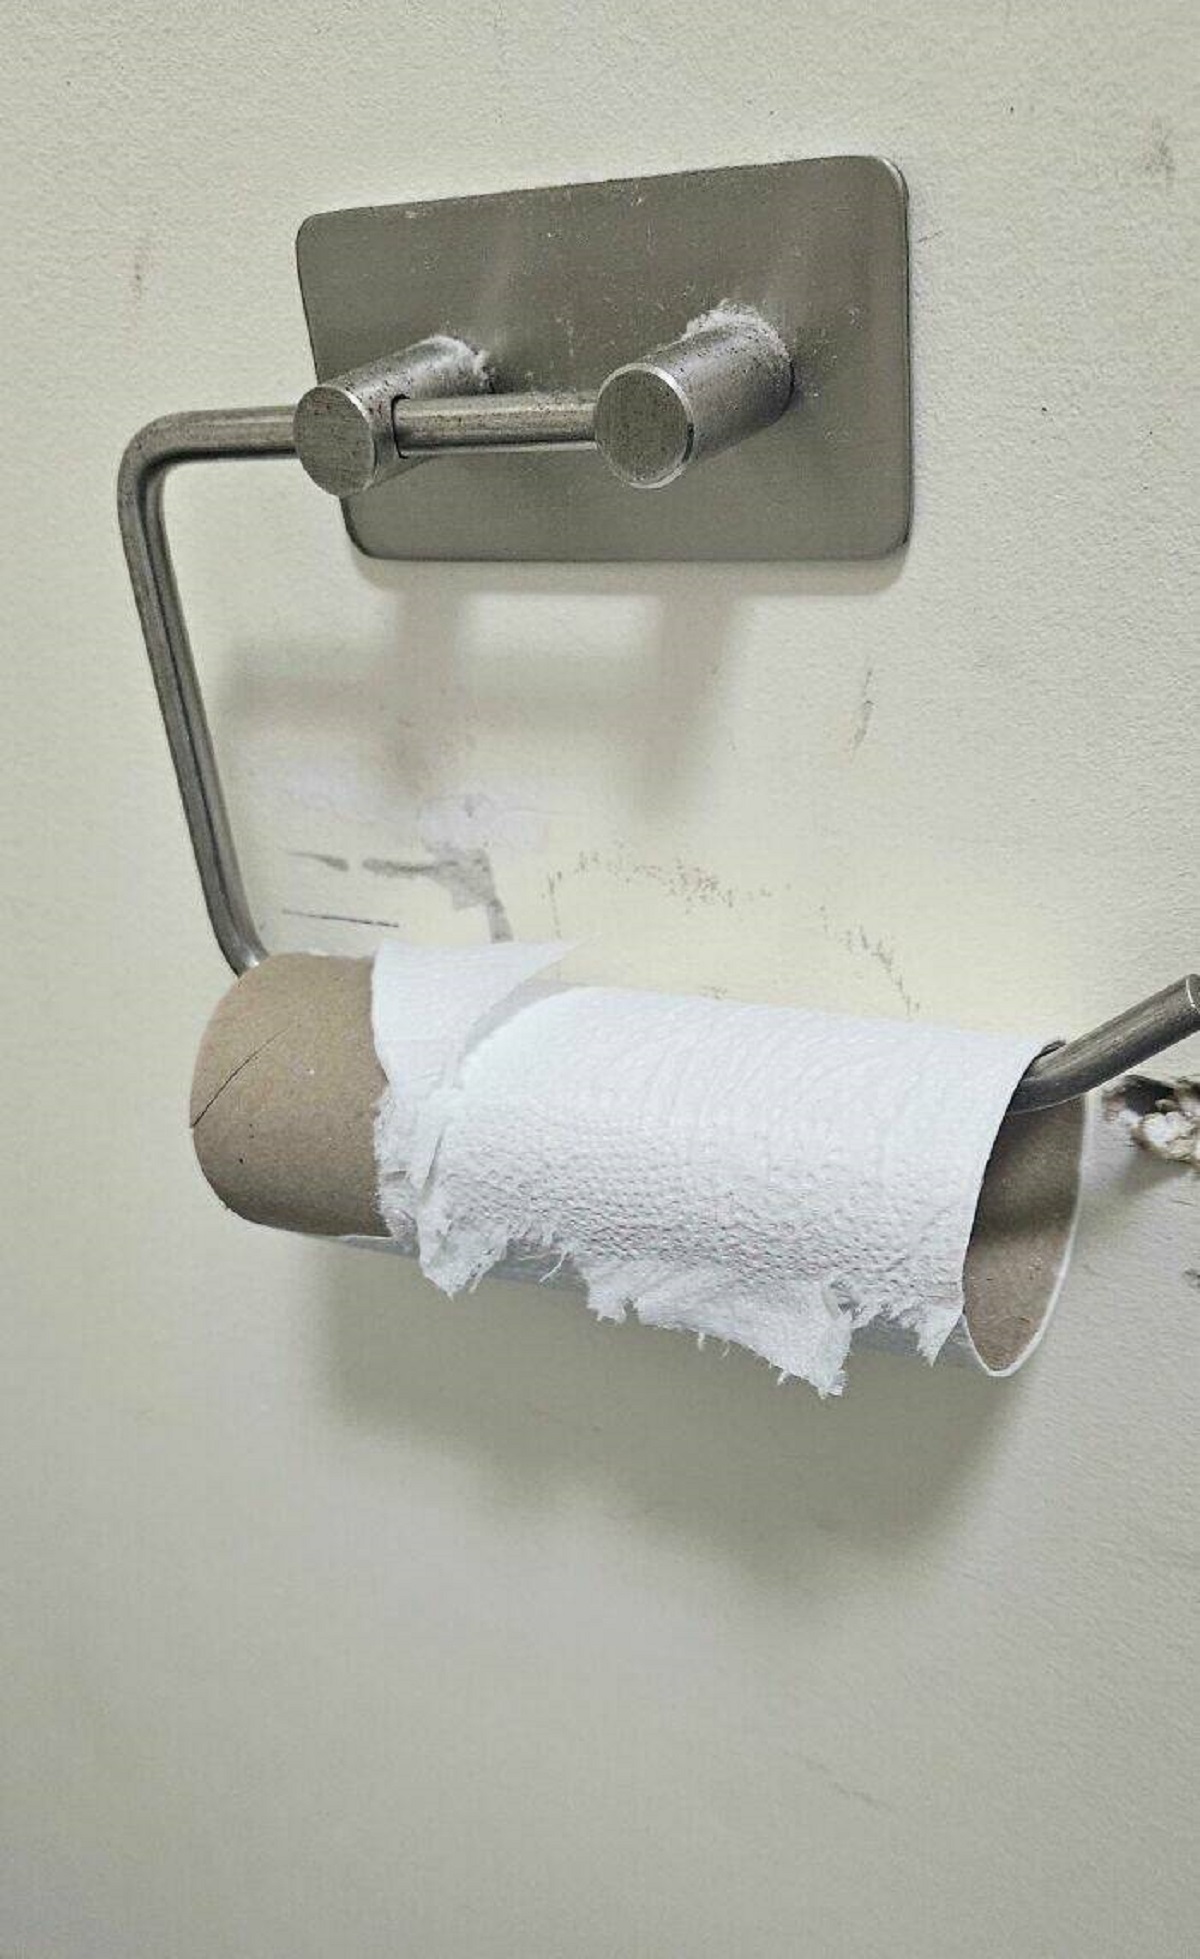 "My Fully Grown Adult Co-Workers Love To Pull This Move To Avoid The Very Tedious Task Of Throwing The Empty Roll In The Trash And Putting A New One In Its Place"